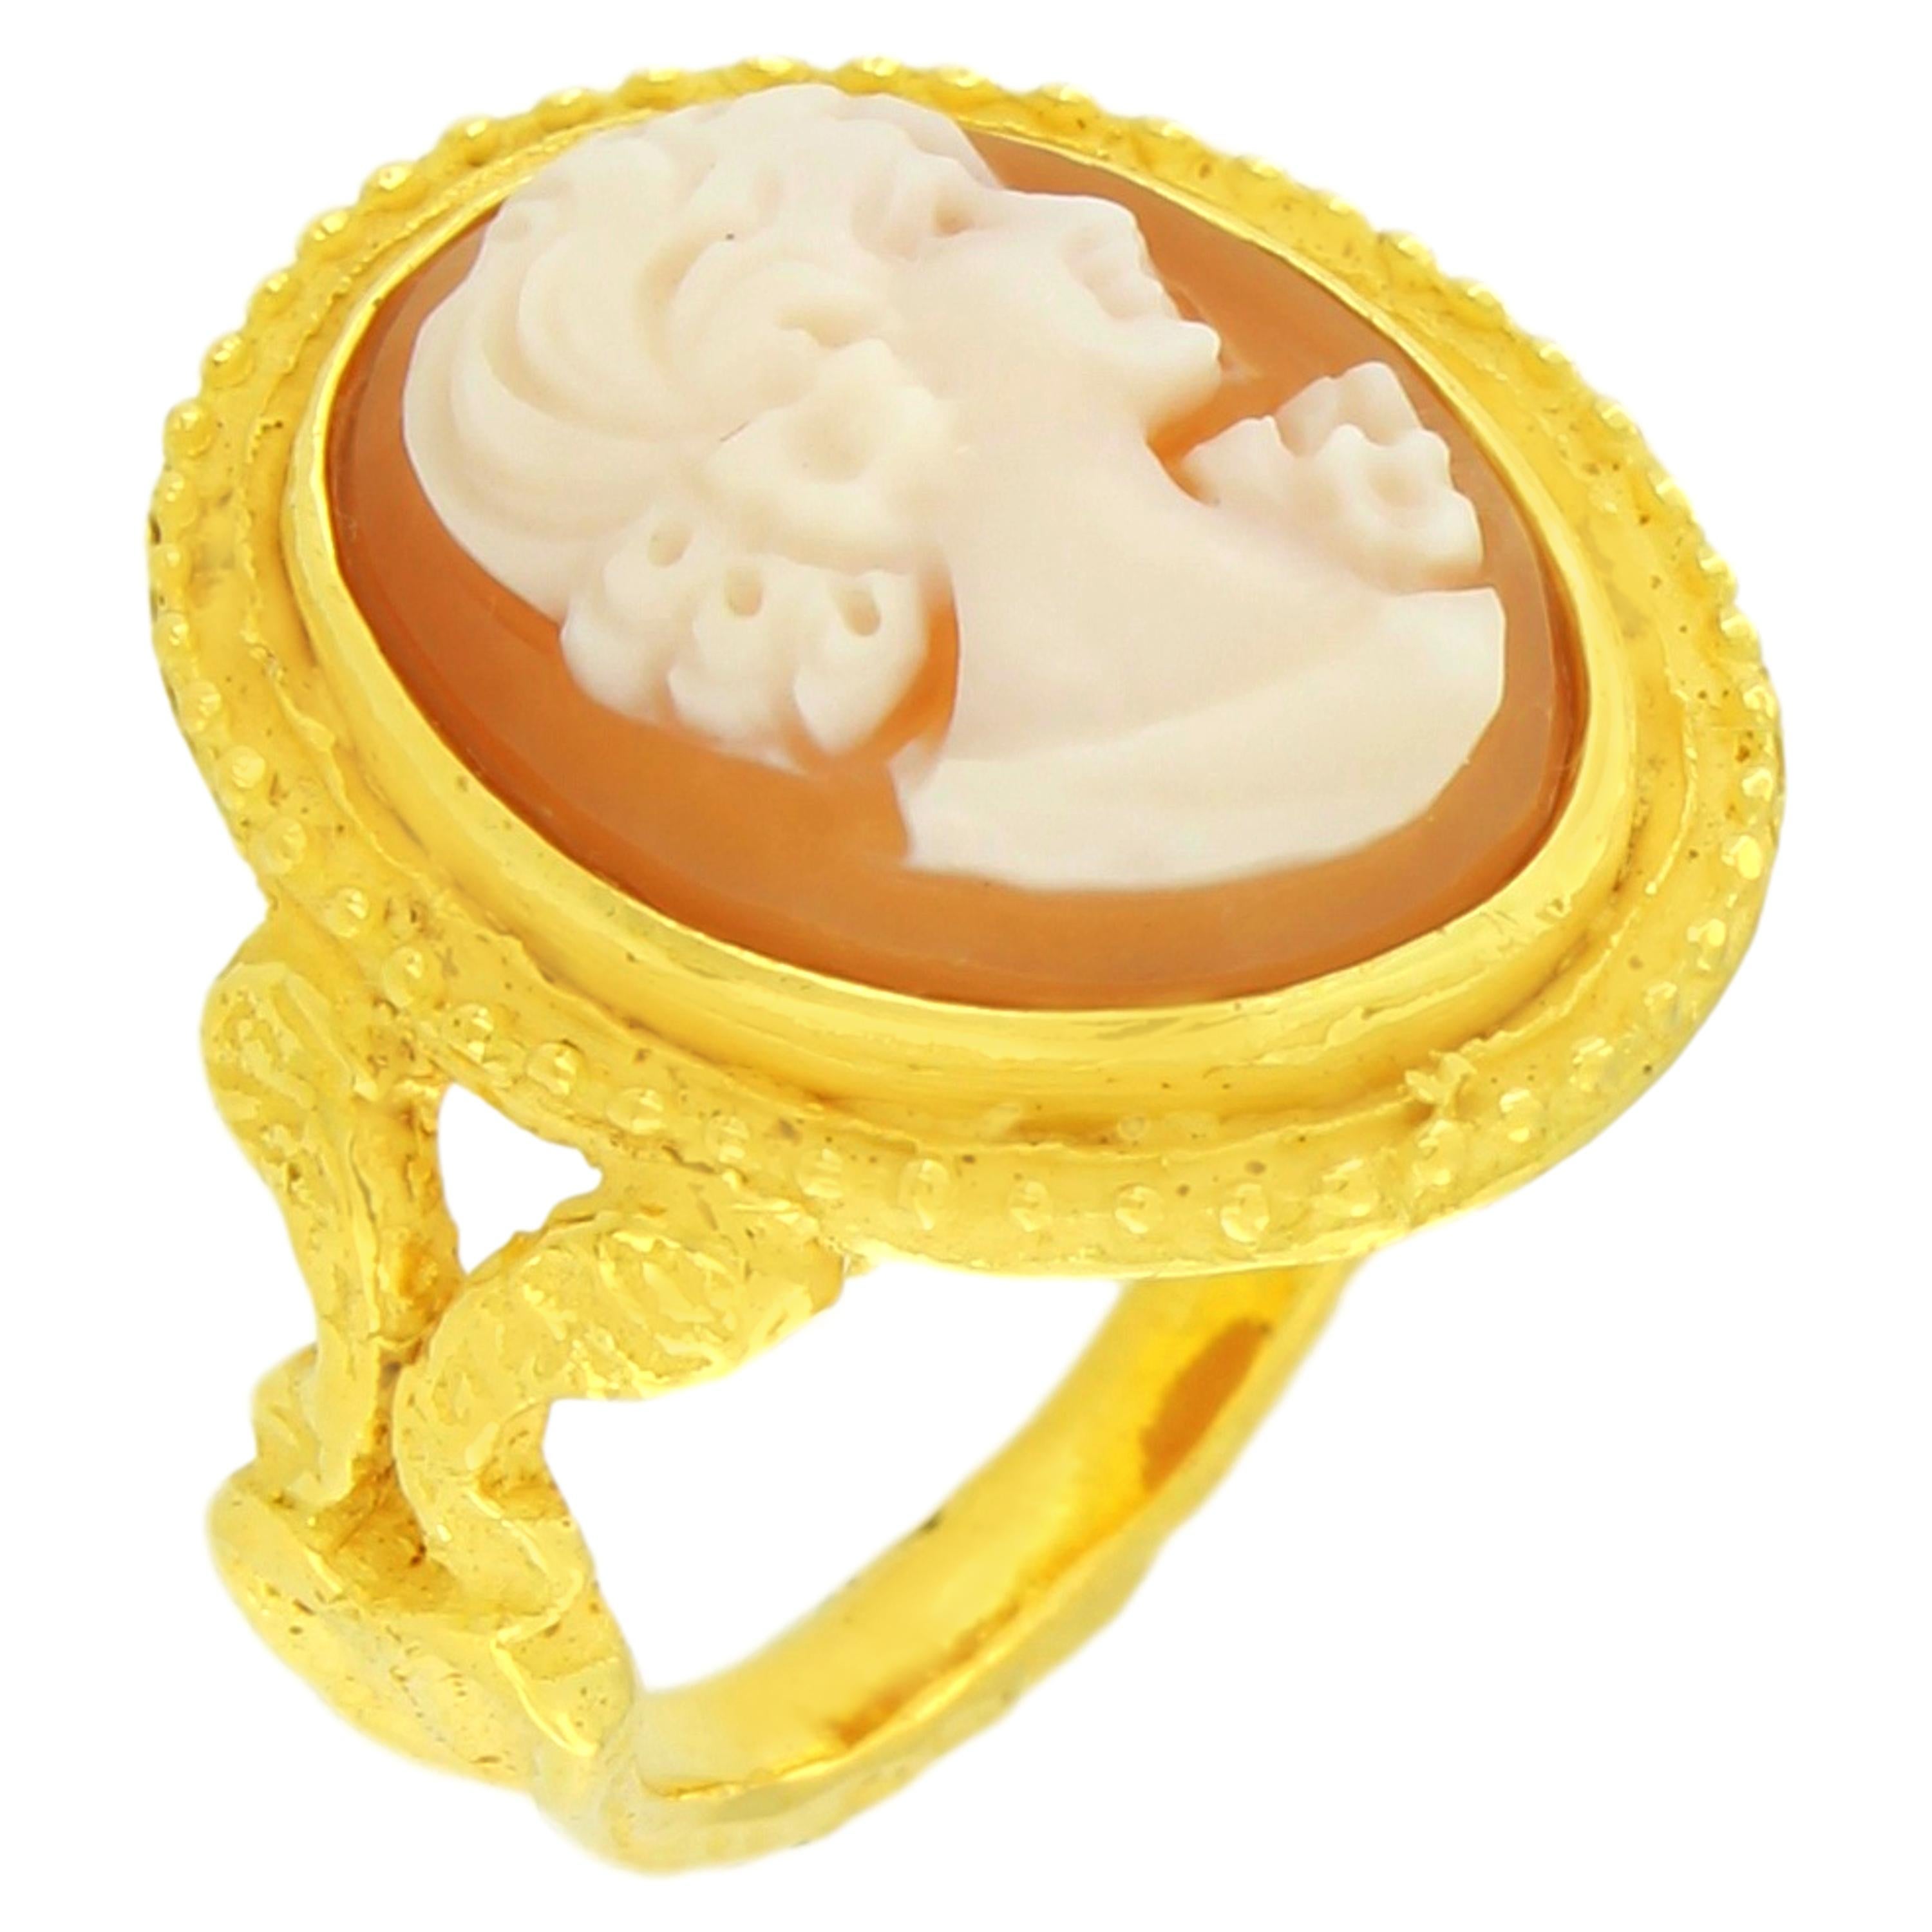 Roman Style Cameo Ring in Satin Yellow Gold, from Sacchi’s 